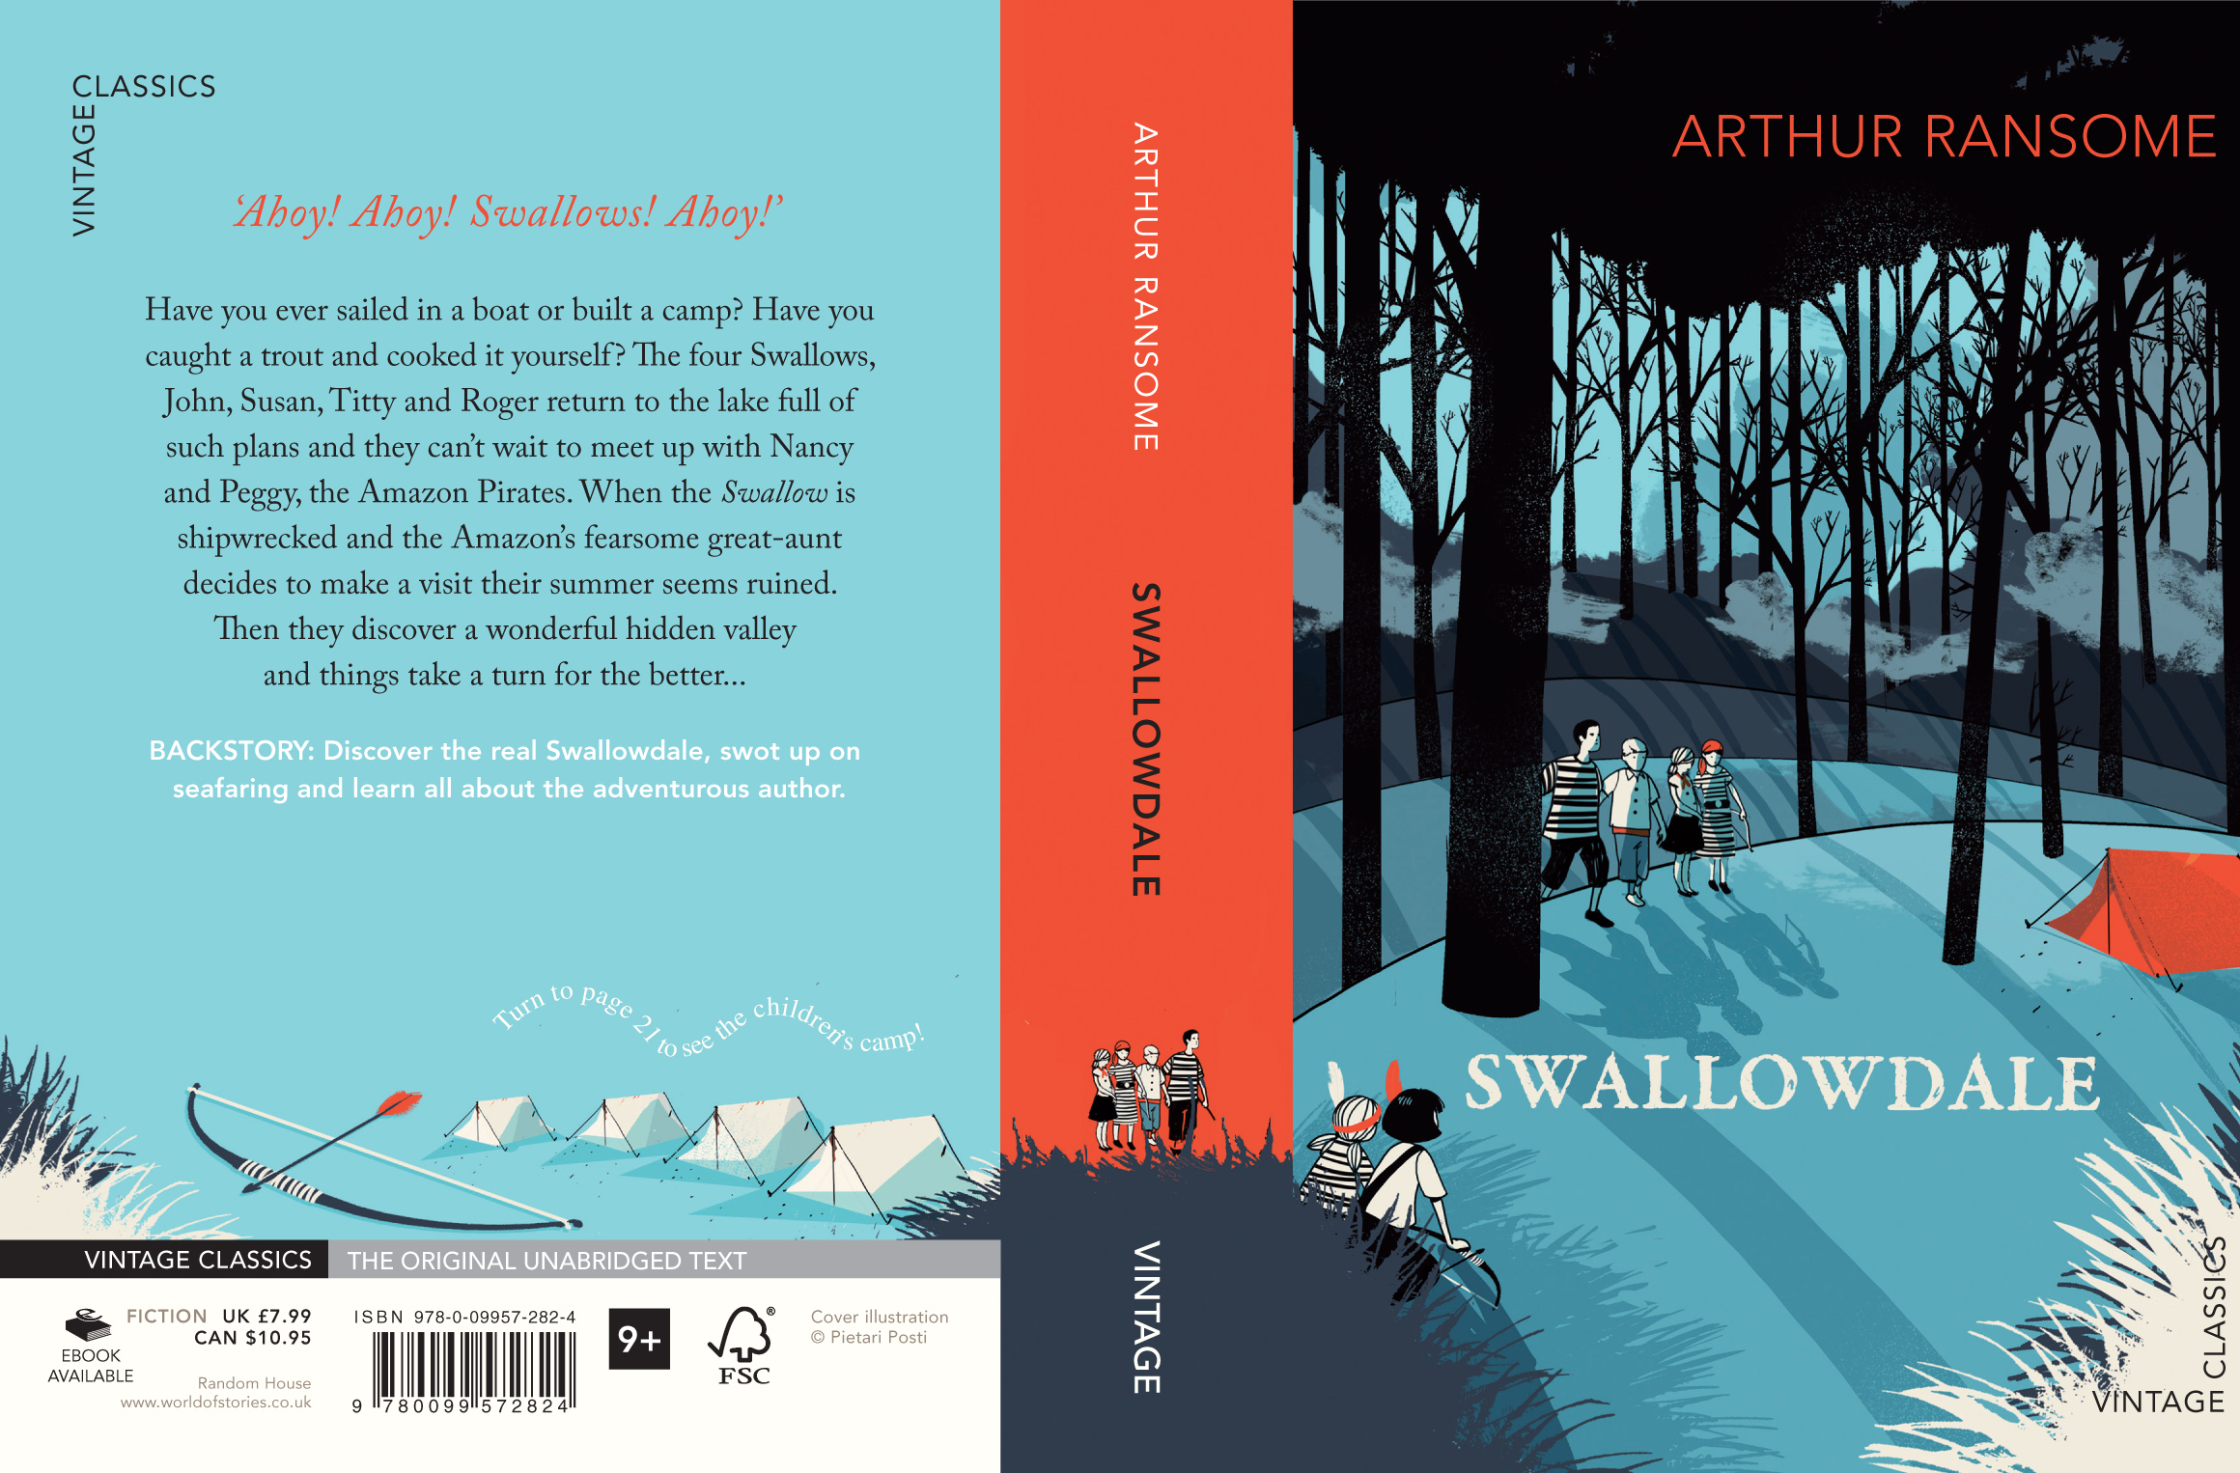 Arthur Ransome - Swallowdale Cover